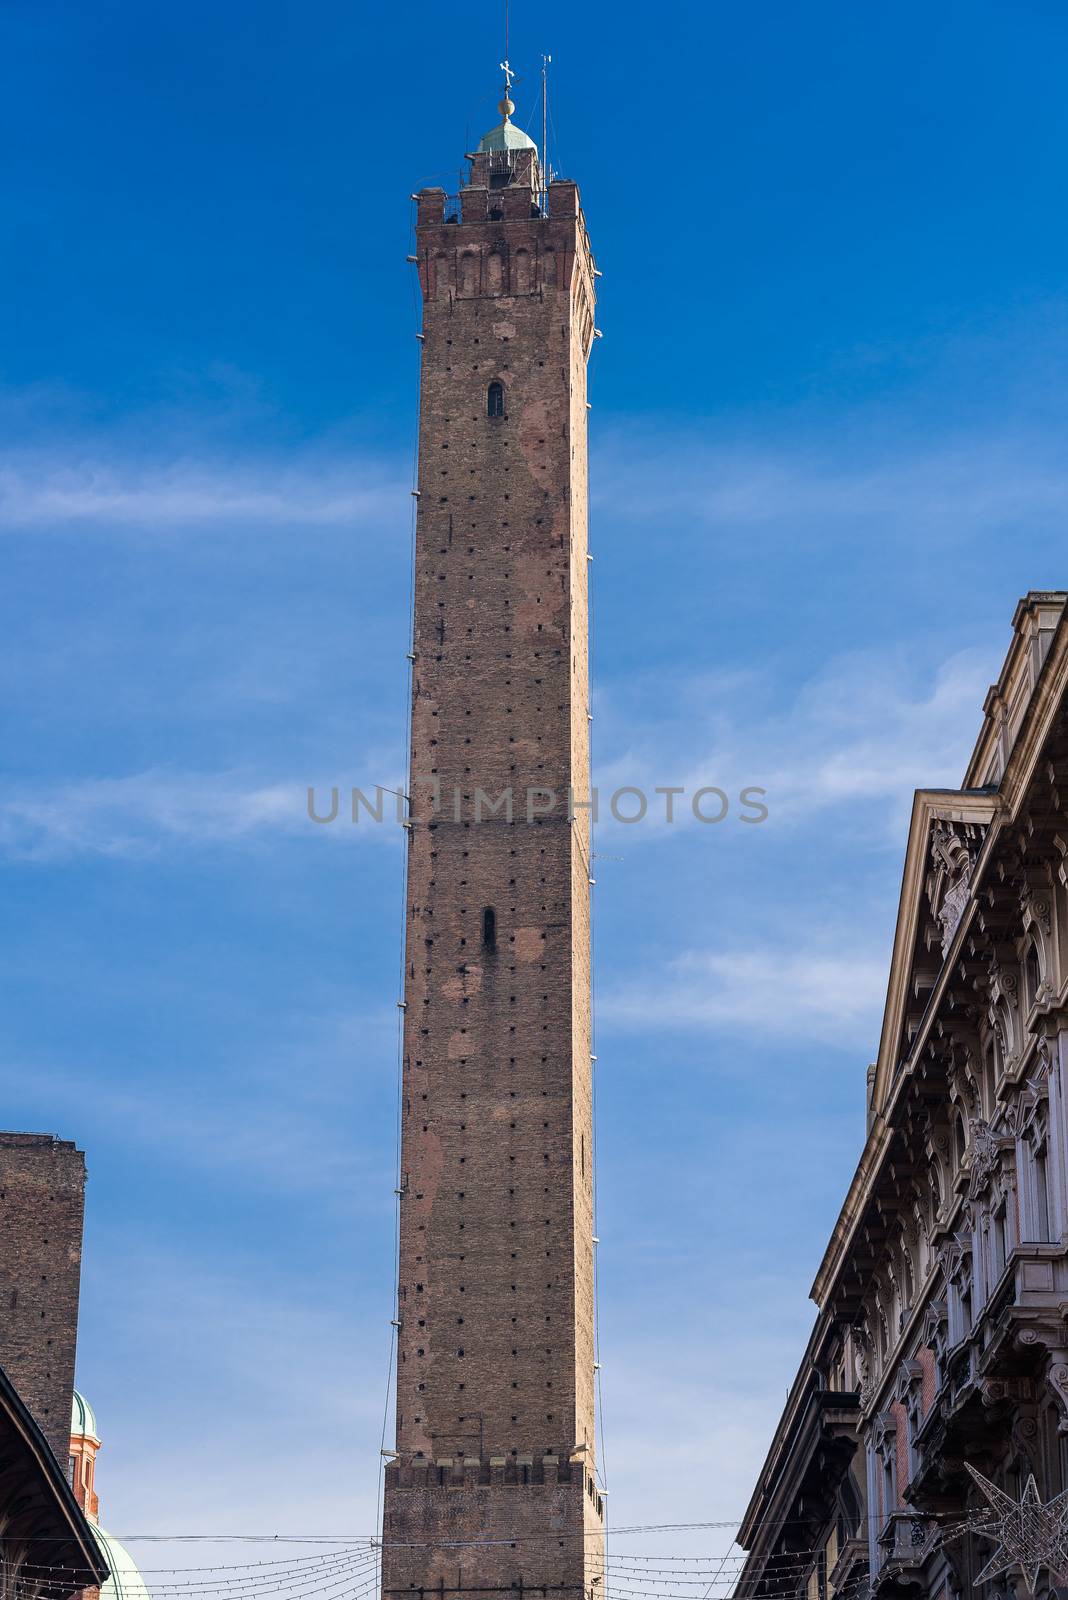 Torre degli Asinelli, one of the two towers, symbol of Bologna